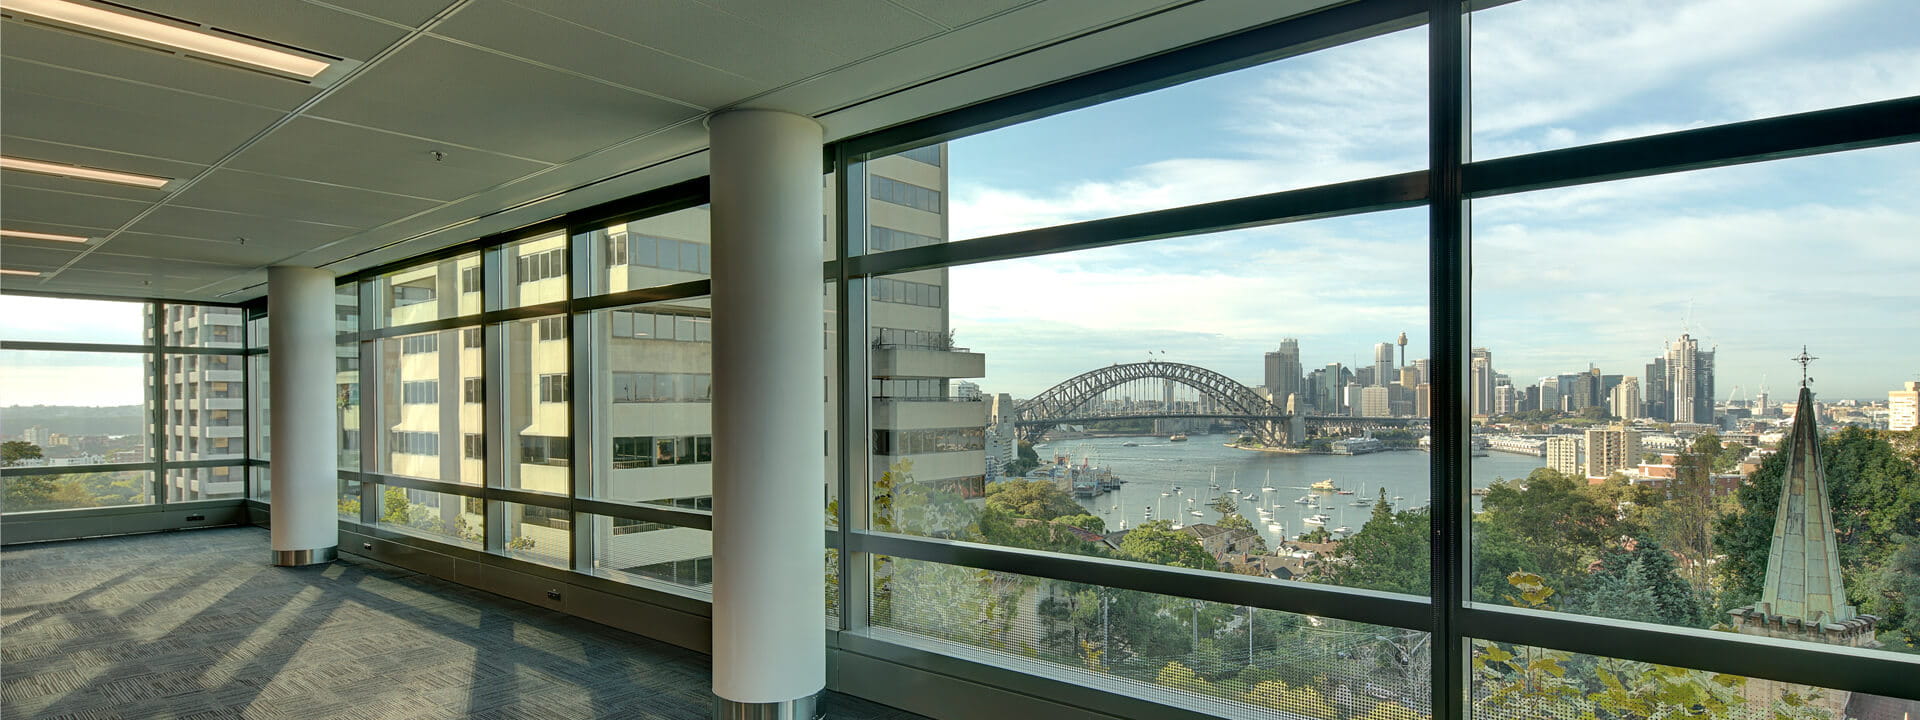 view to Harbour Bridge from the office building